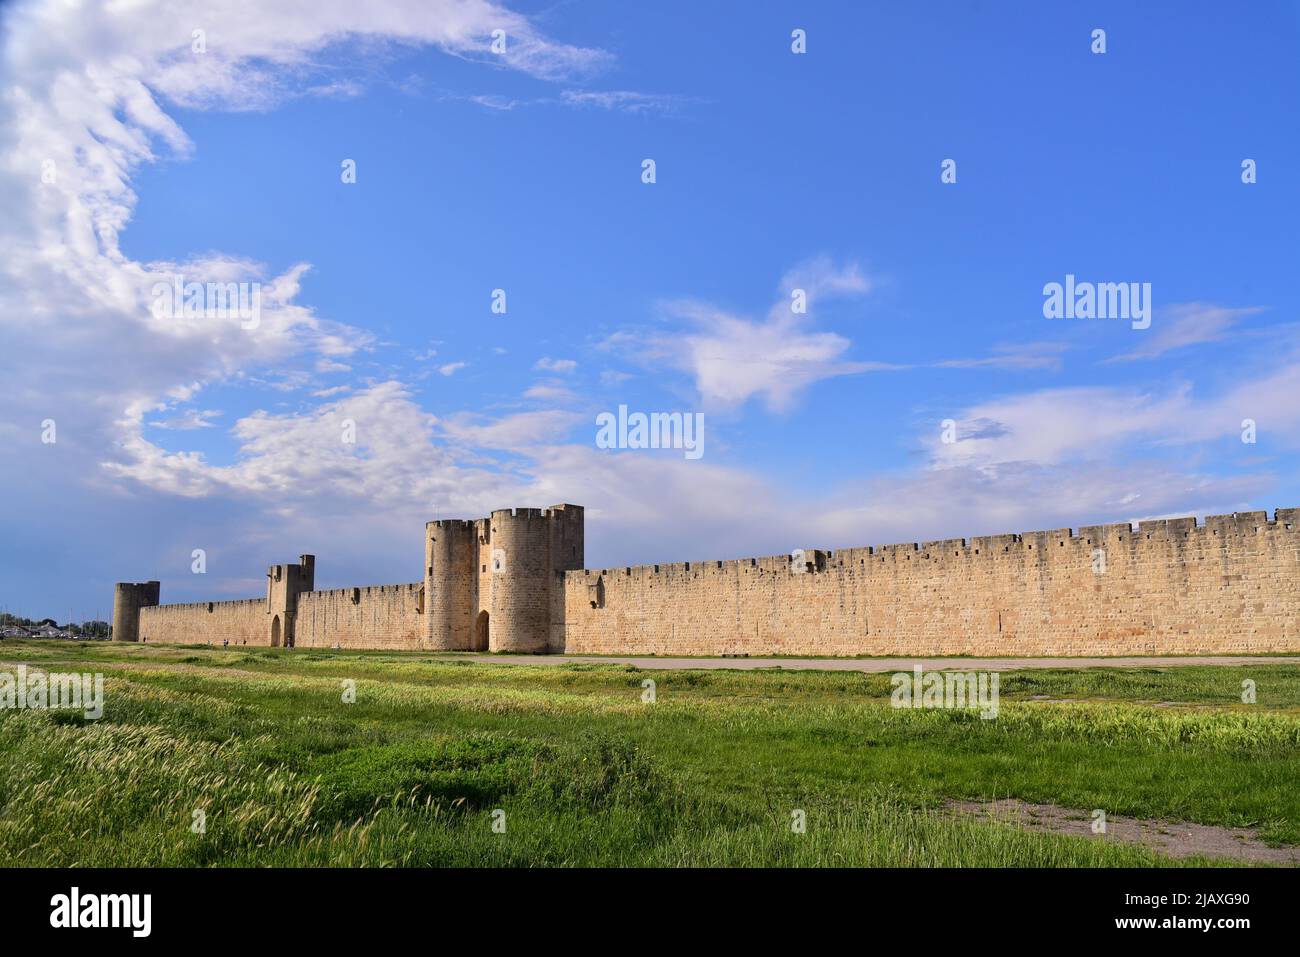 Historic ramparts of the town of Aigues-Mortes in the Camargue, Gard department, Occitania, France, Europe Stock Photo